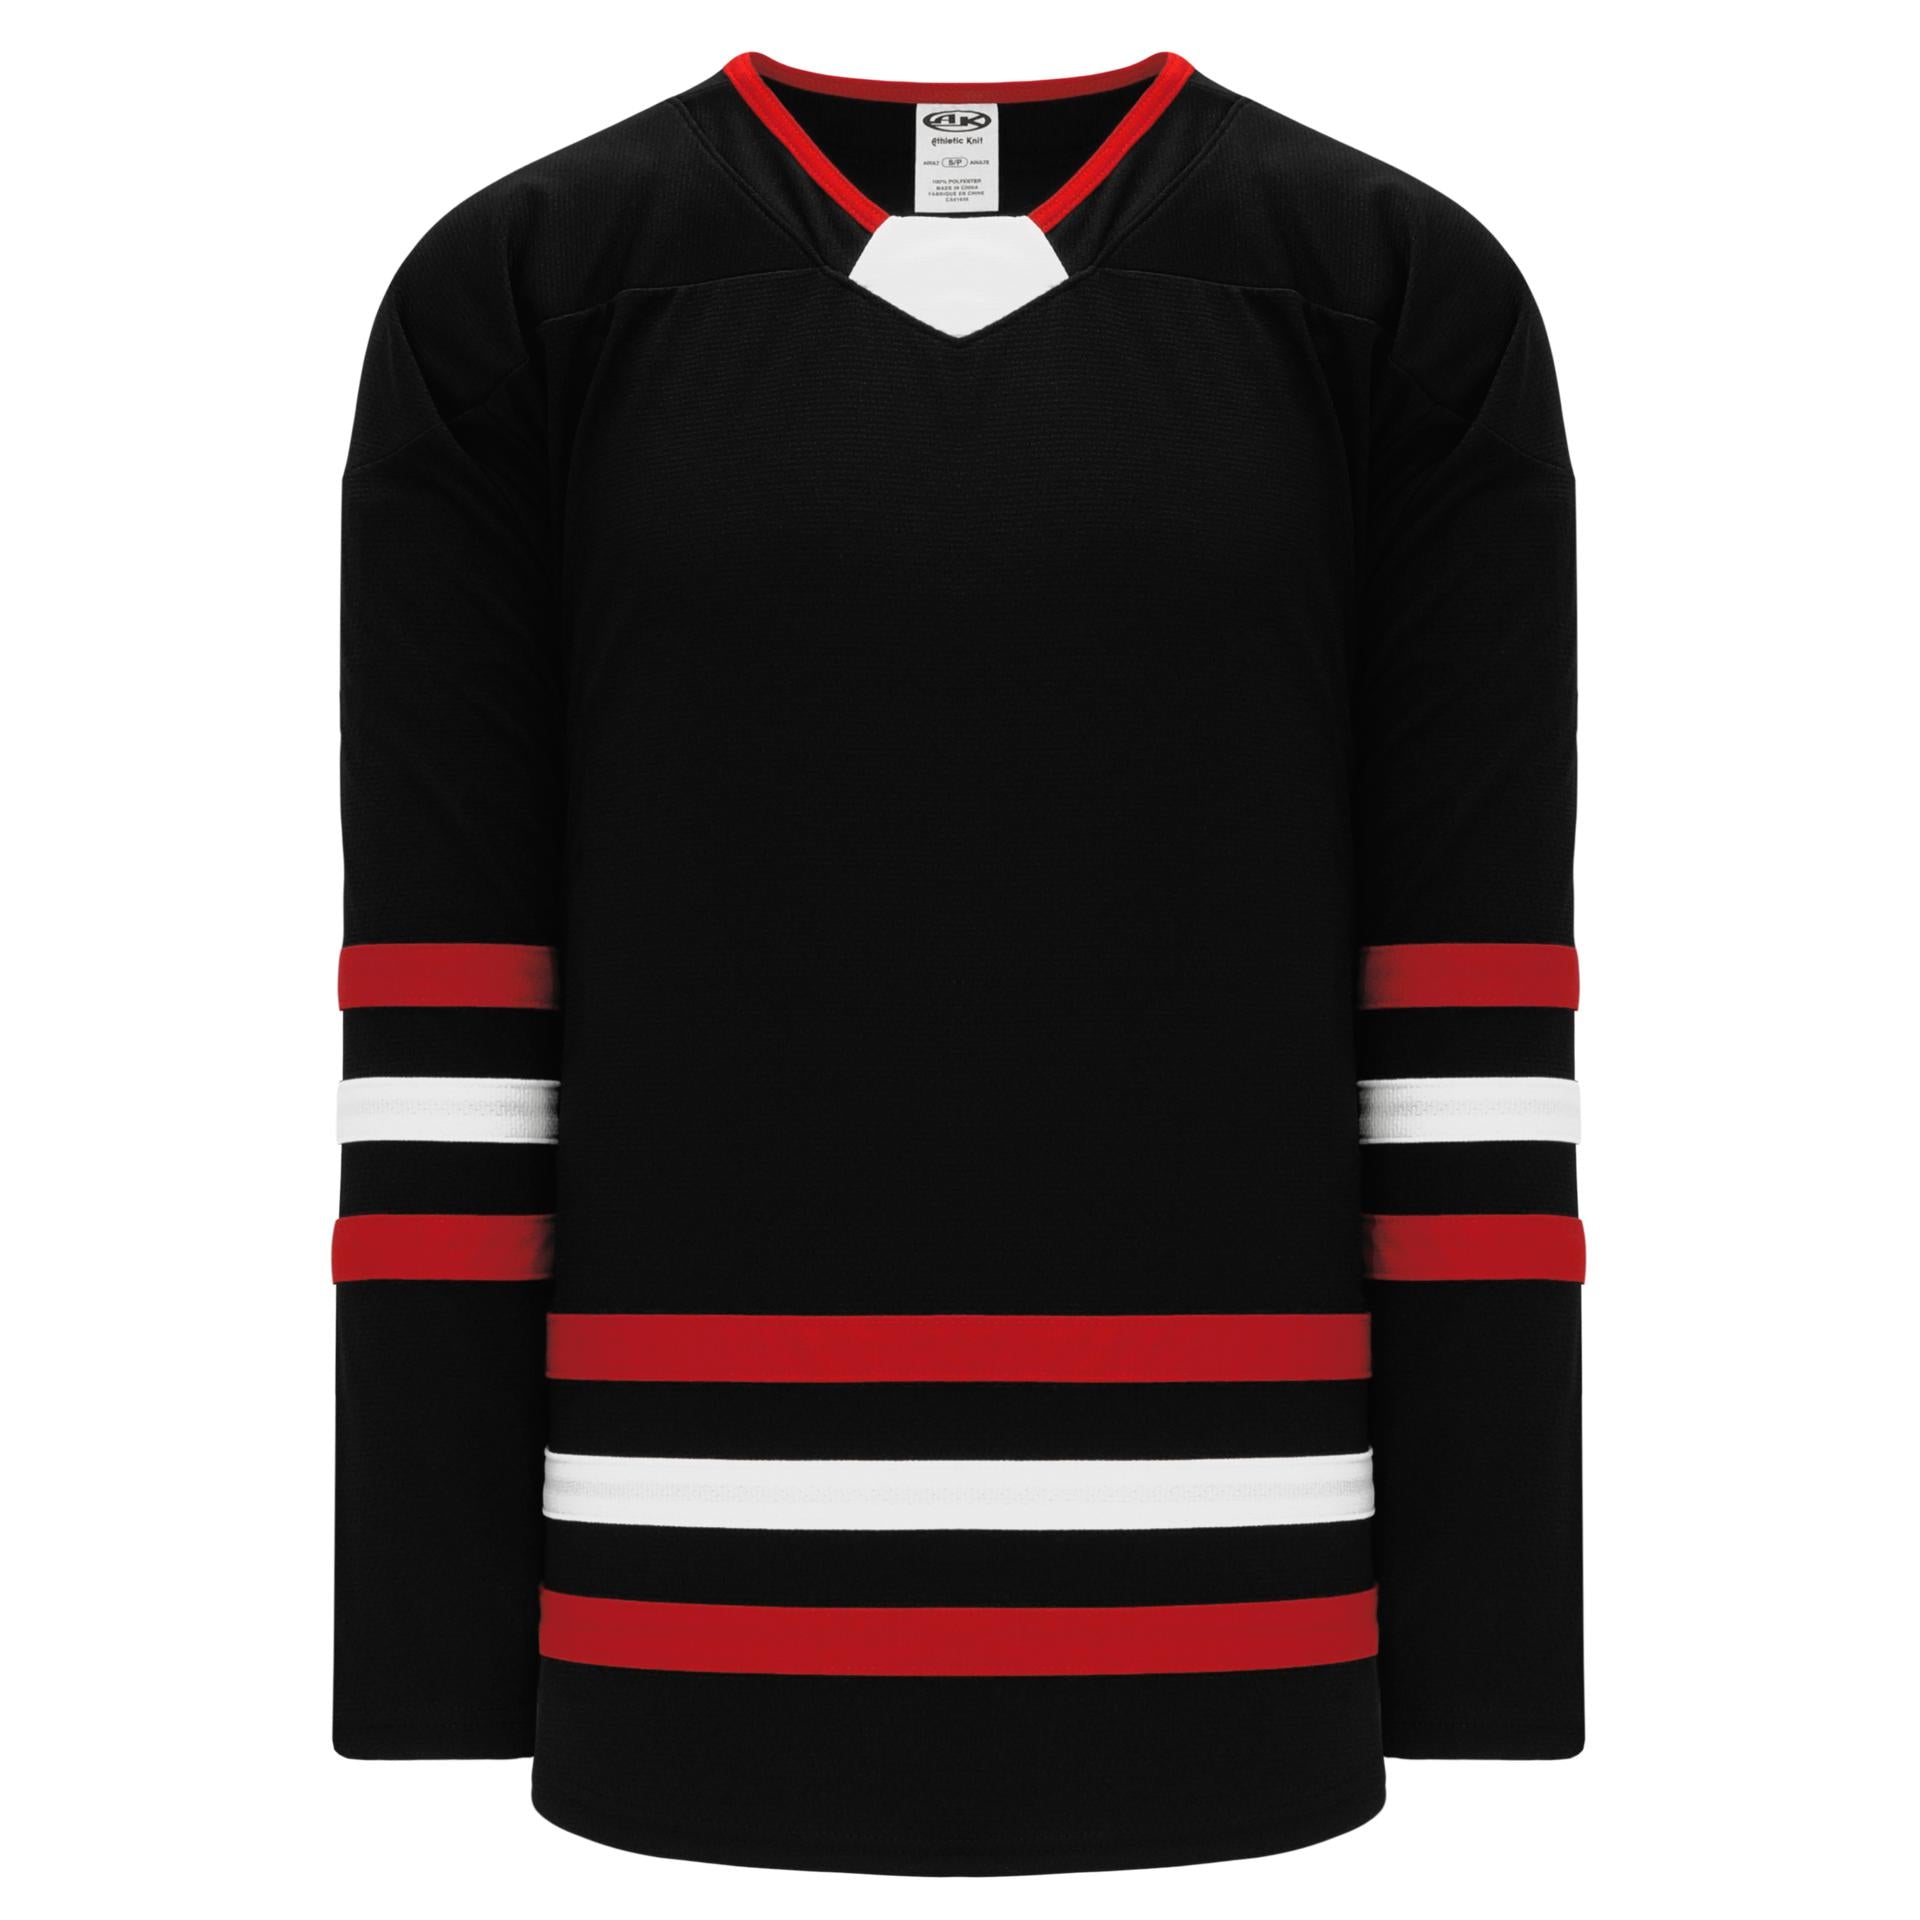 NHL Chicago Blackhawks '22-'23 Special Edition Red Replica Blank Jersey